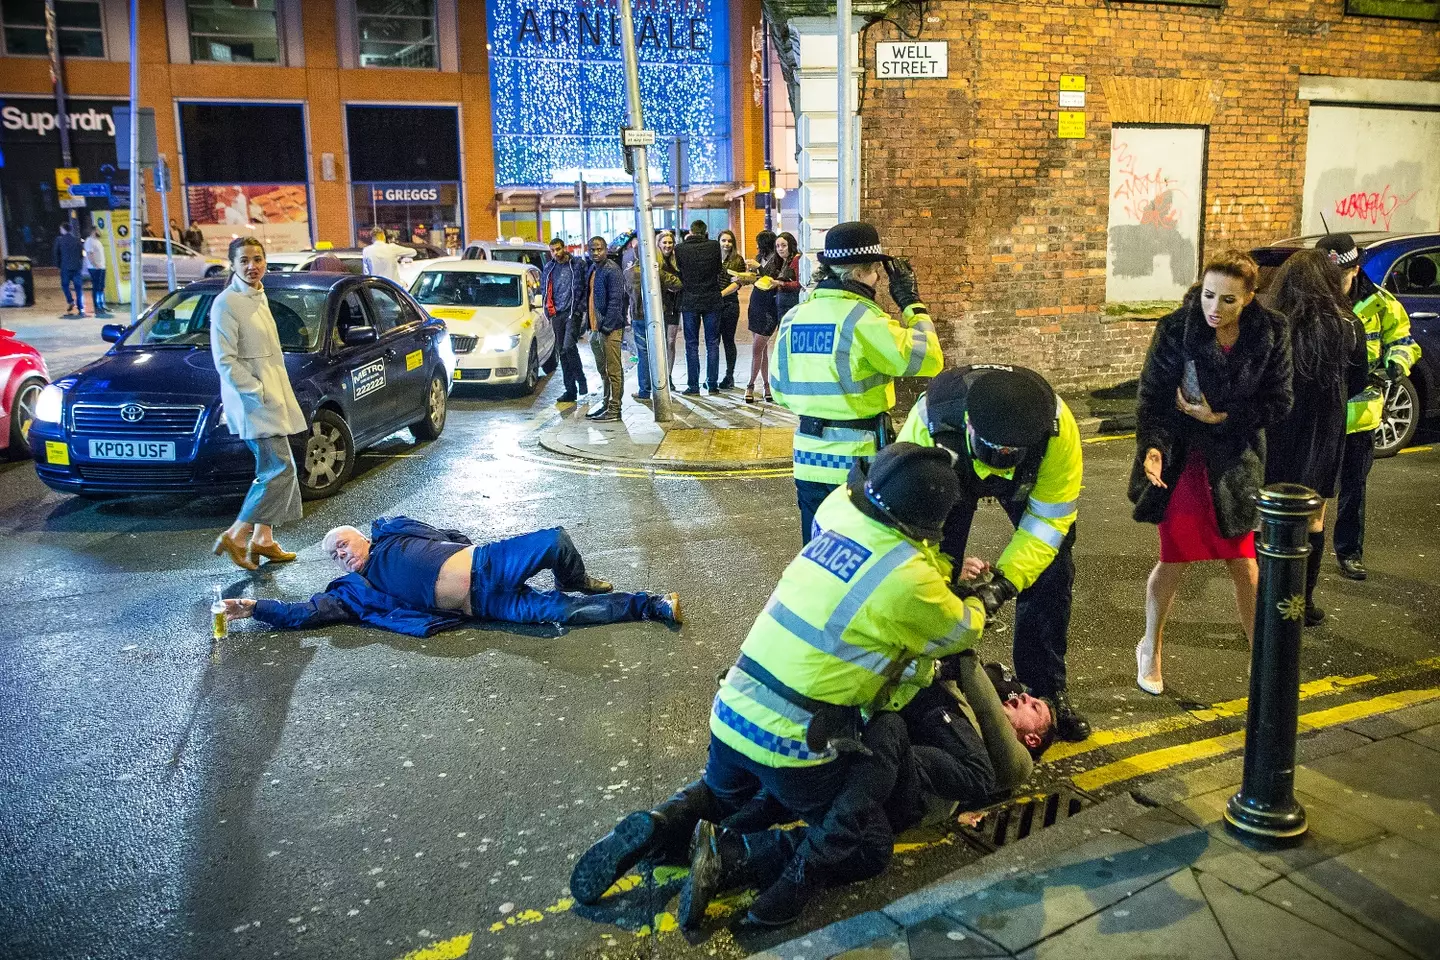 Joel's OG photo, taken on Wells Street, also depicted the chaos of New Year's Eve.